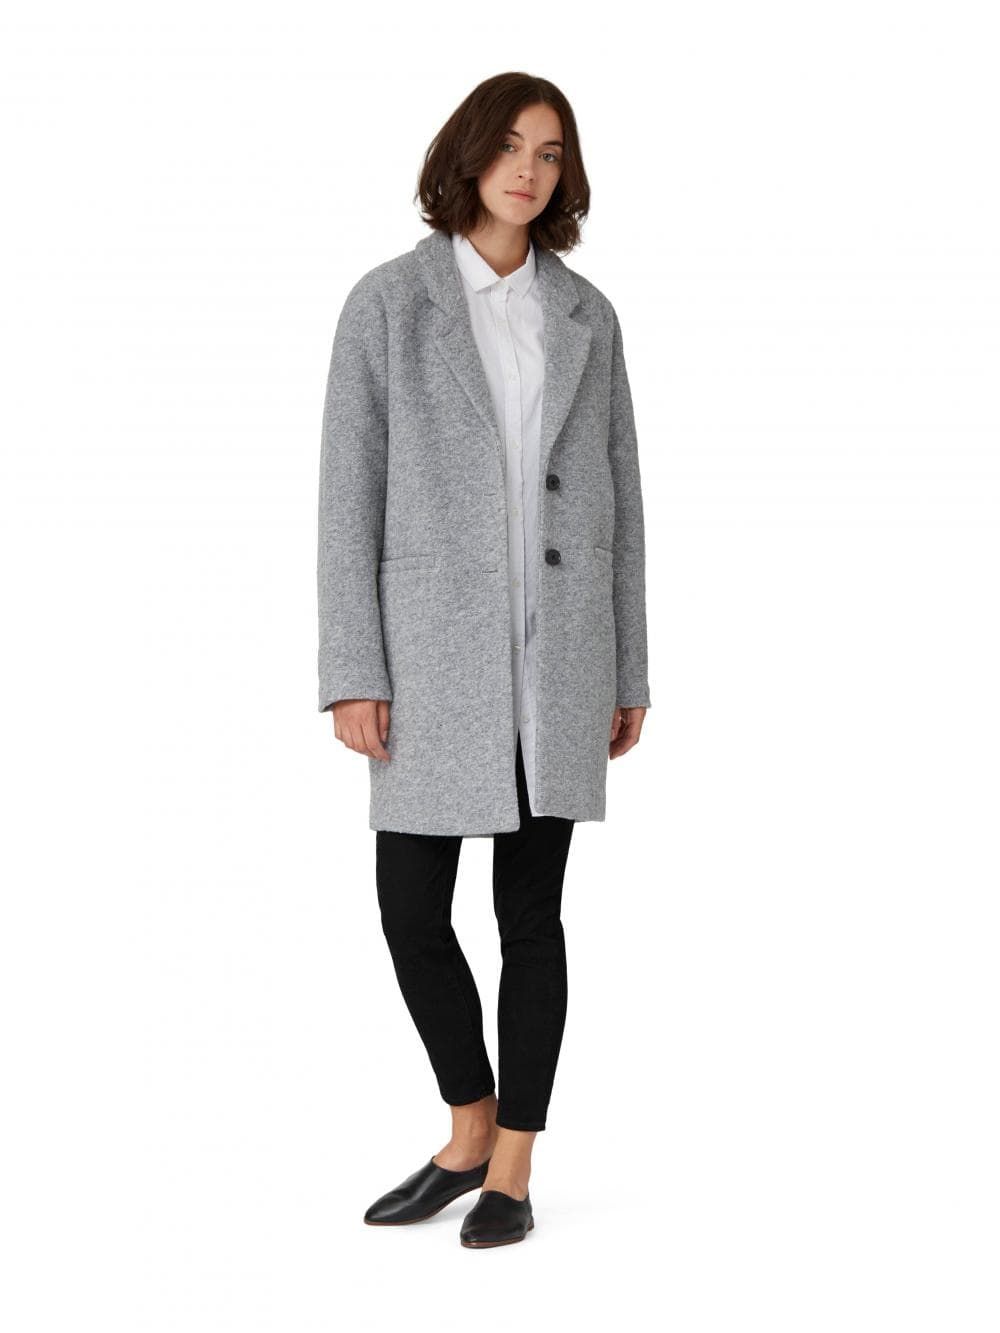 don’t let this coat sell-out before you get one for yourself